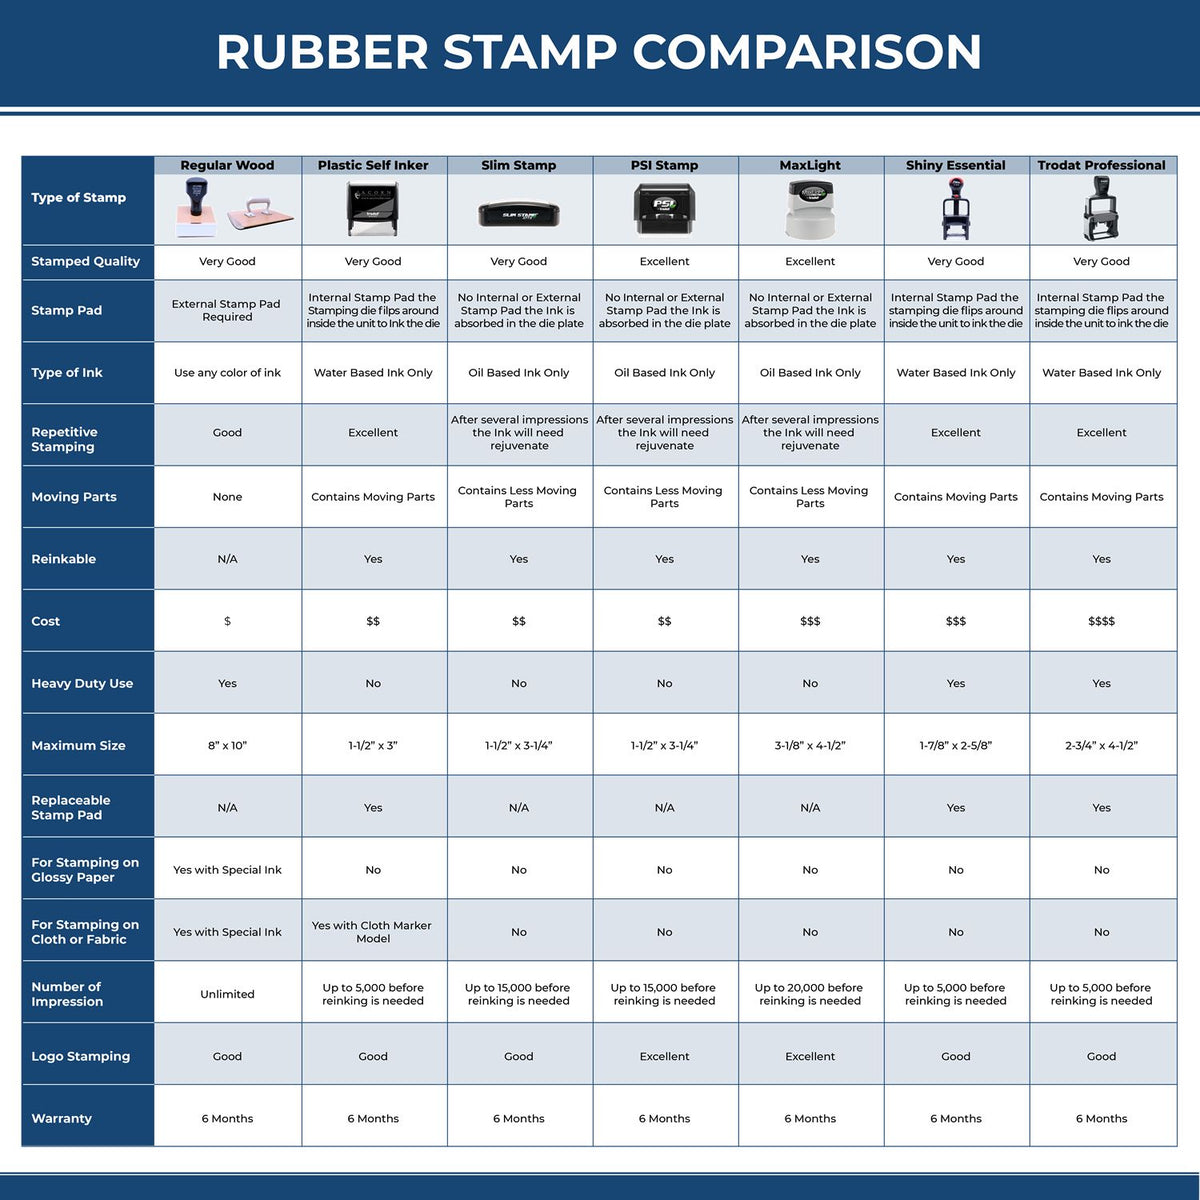 Large Skinny Rush Rubber Stamp 5570R Rubber Stamp Comparison